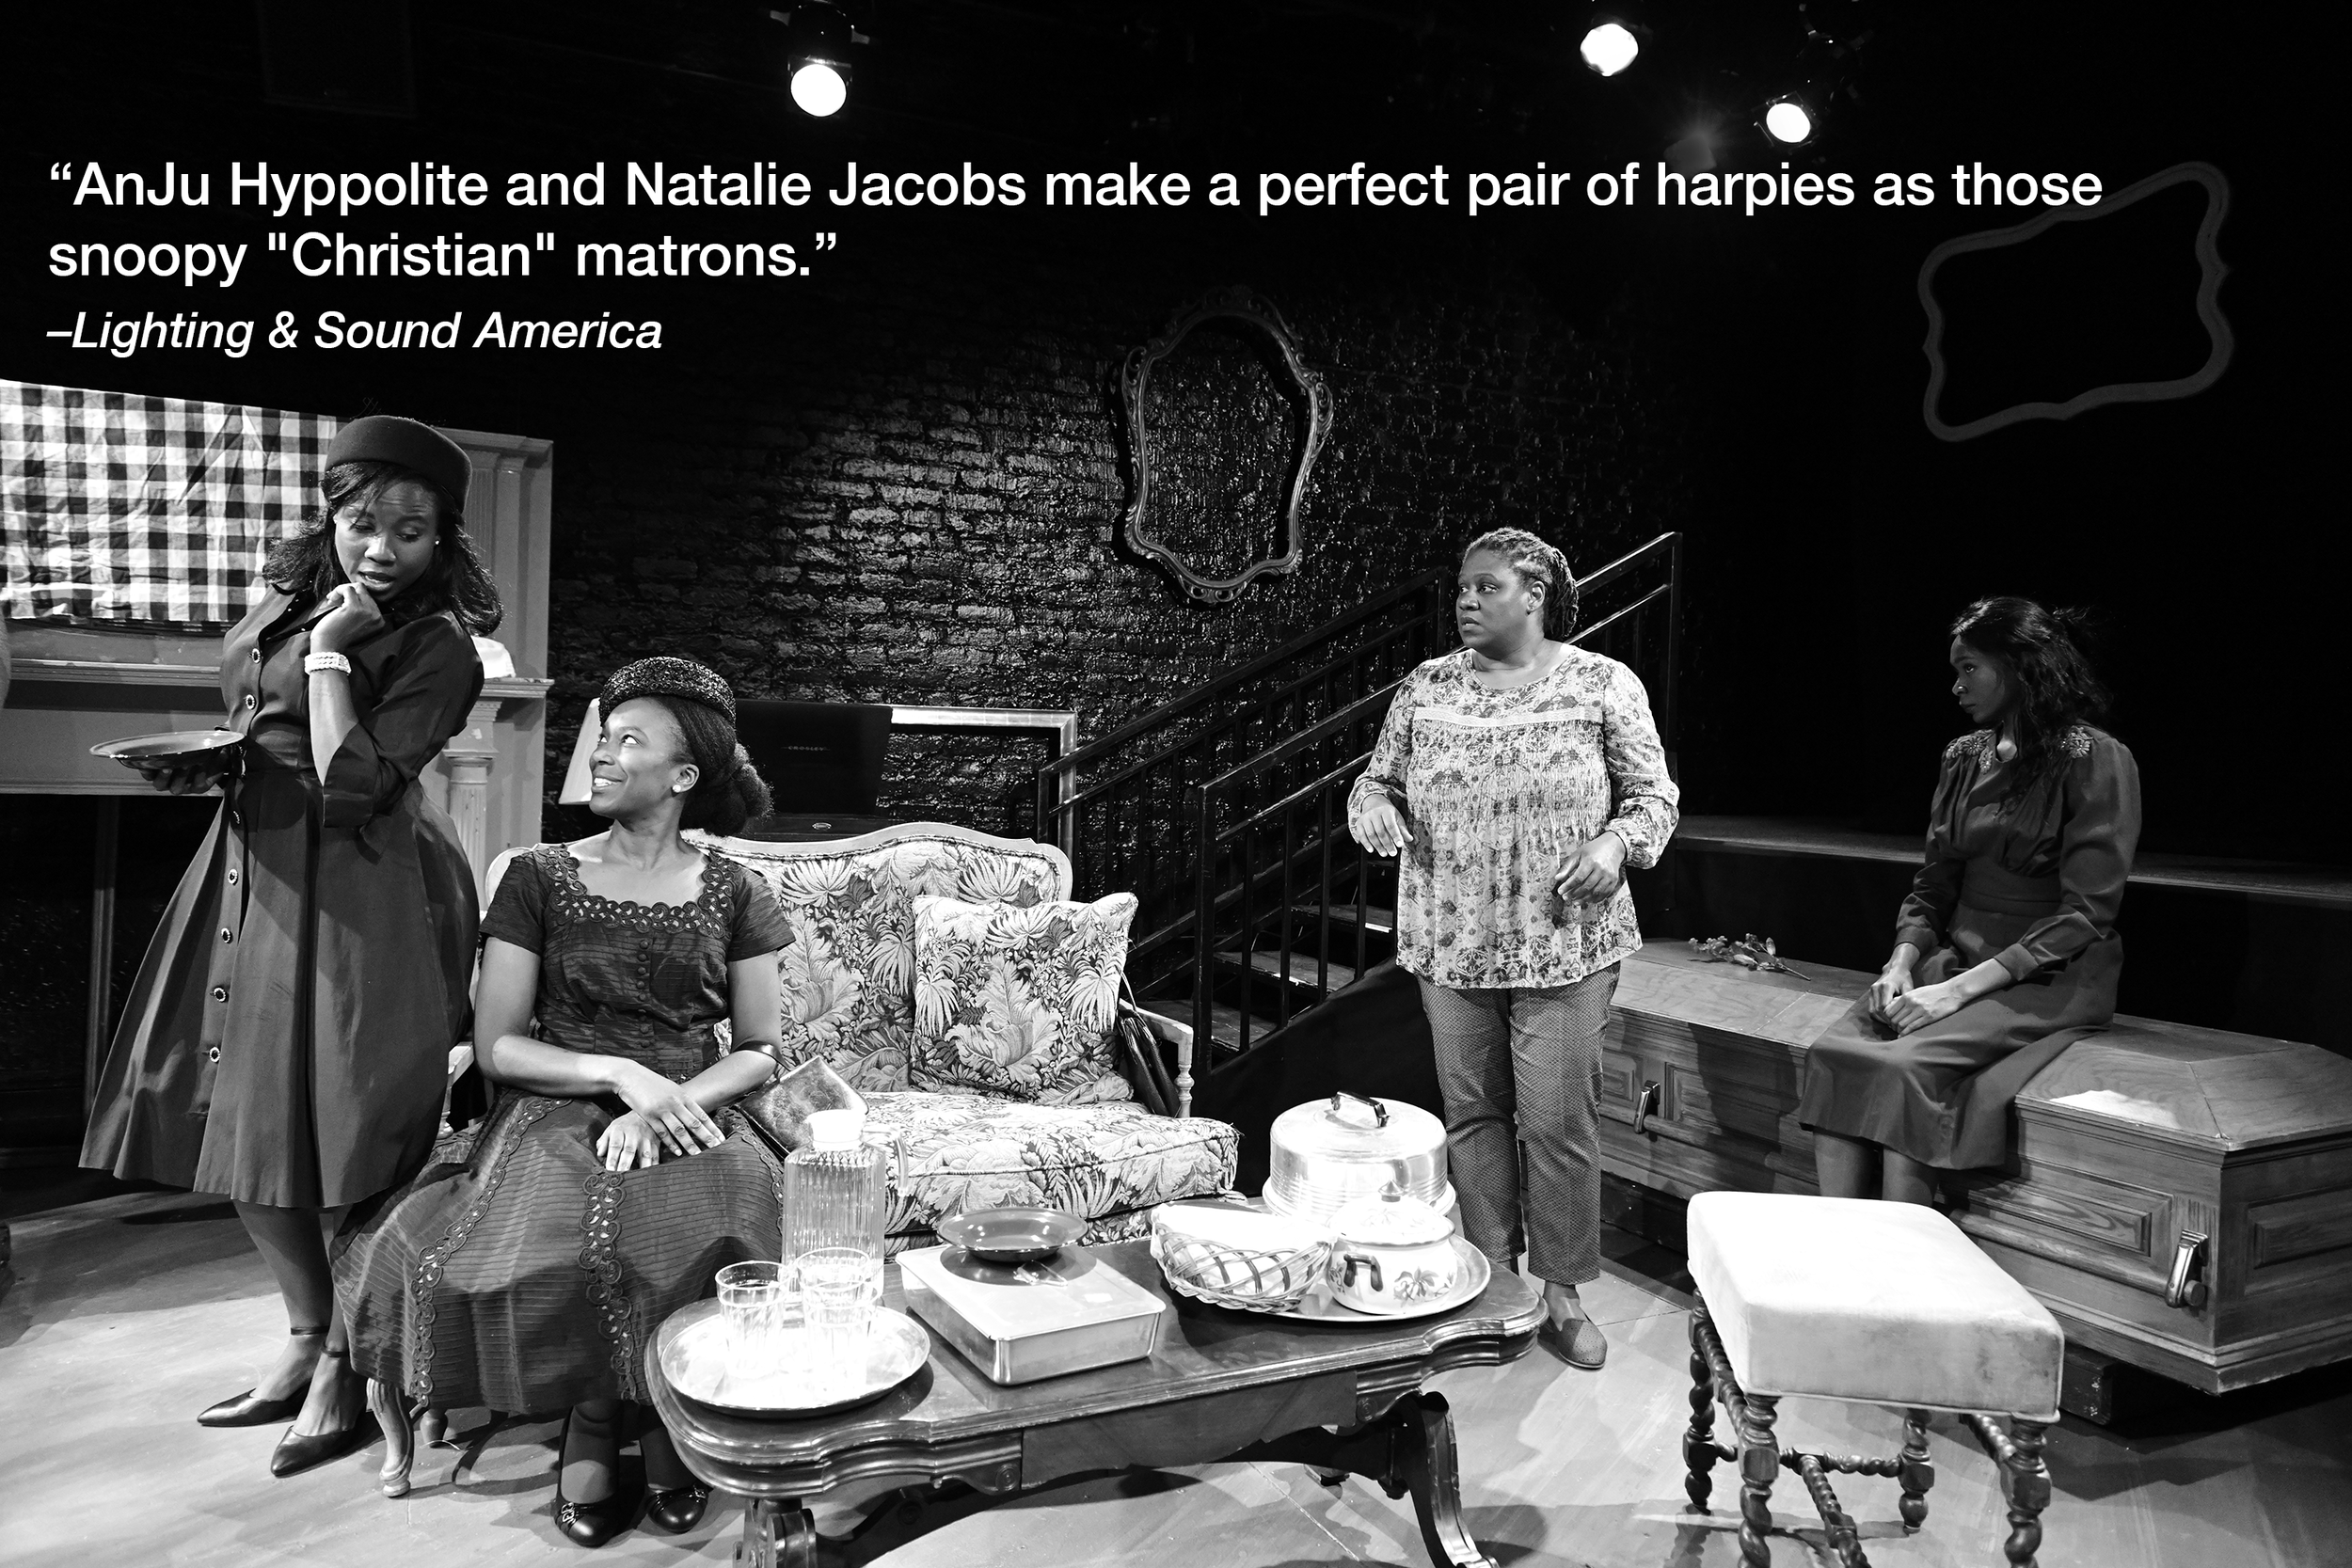  Natalie Jacobs (Constance Jenkins) and AnJu Hyppolite (Mabel Mosley) gossip as Joyia D. Bradley (Louise Sterling) and Kayland Jordan (Annabelle “Belle” Pierson) watch, in a scene from  Mirrors . Photo by John Quilty.  A quote in white text reads “An